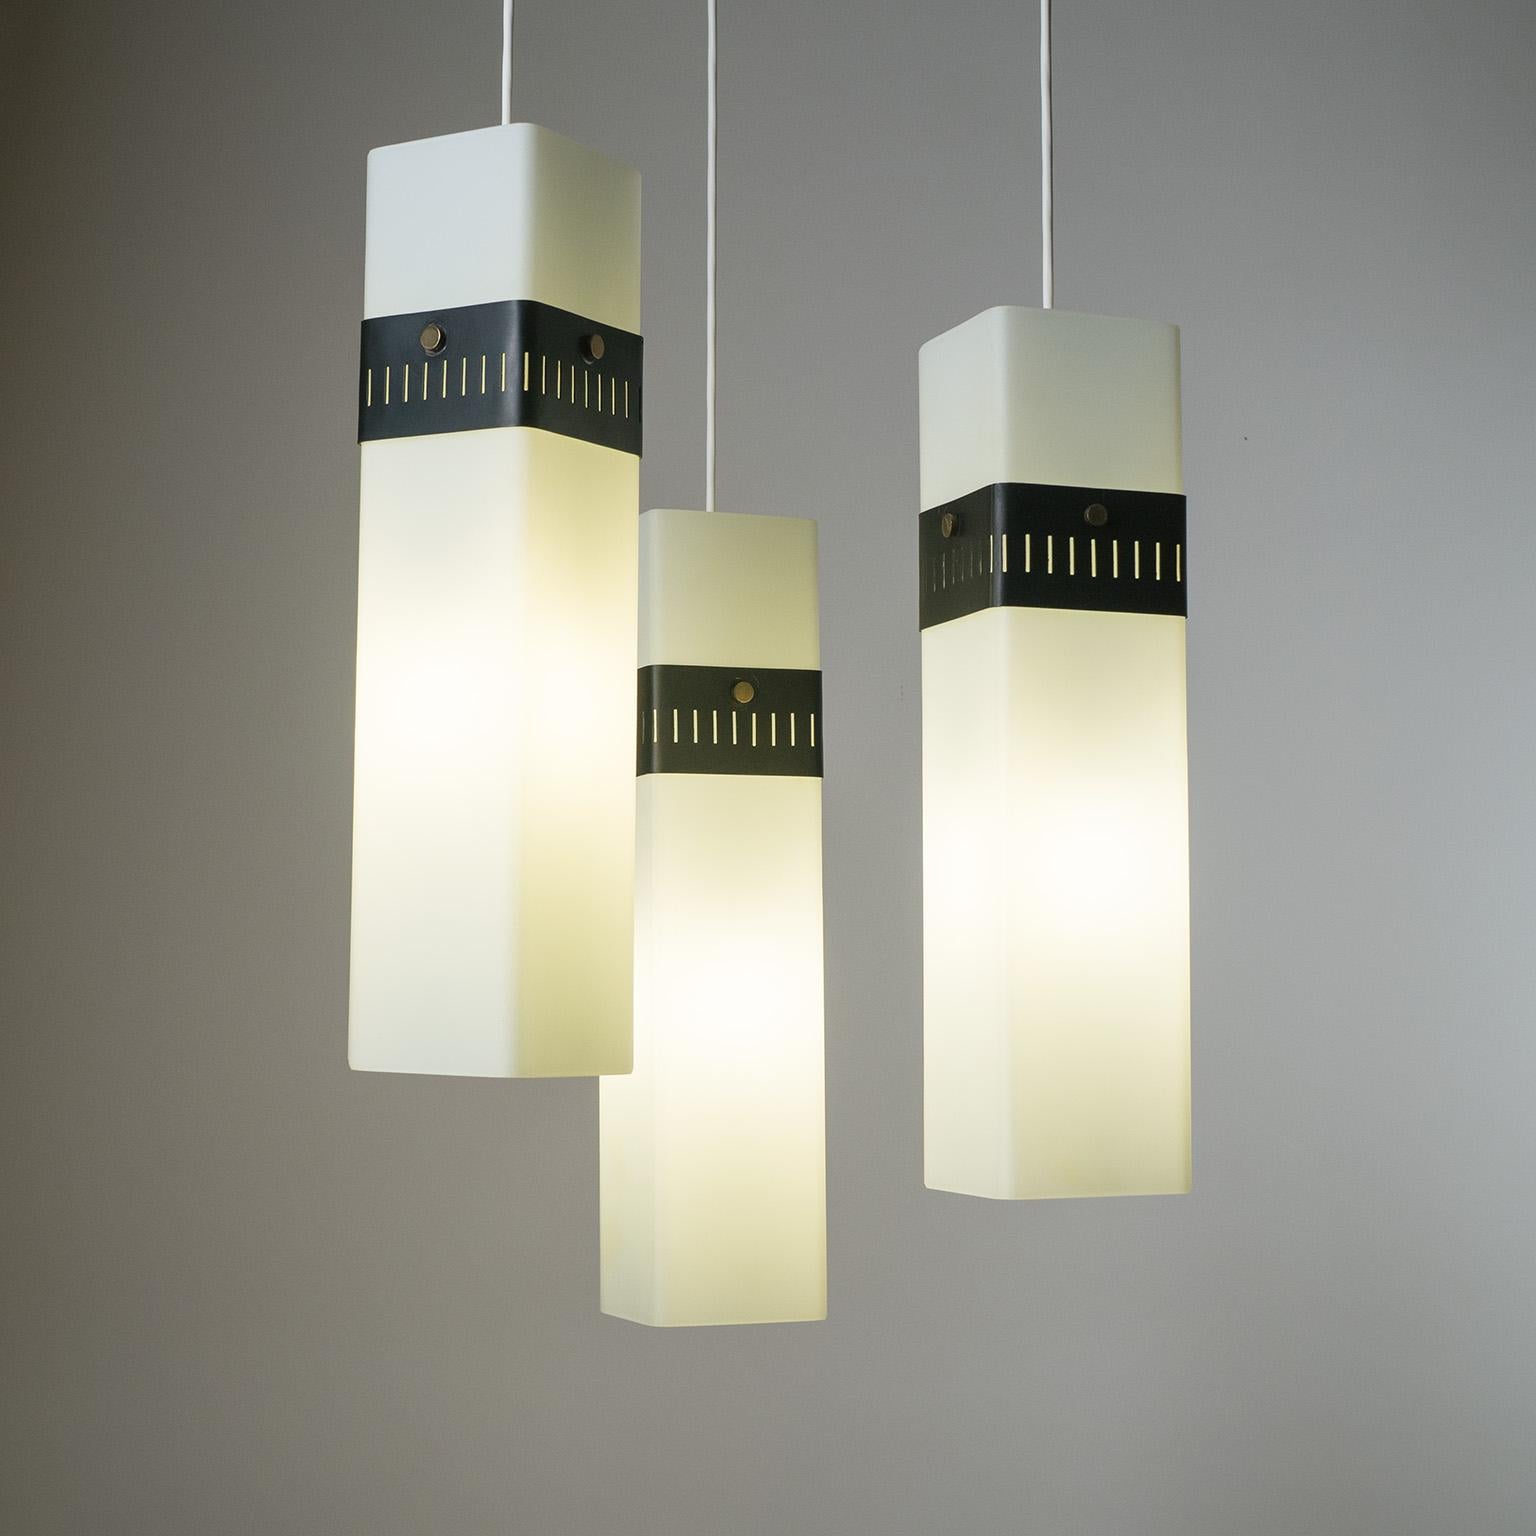 Lacquered Italian Satin Glass Suspension Chandelier, 1950s For Sale